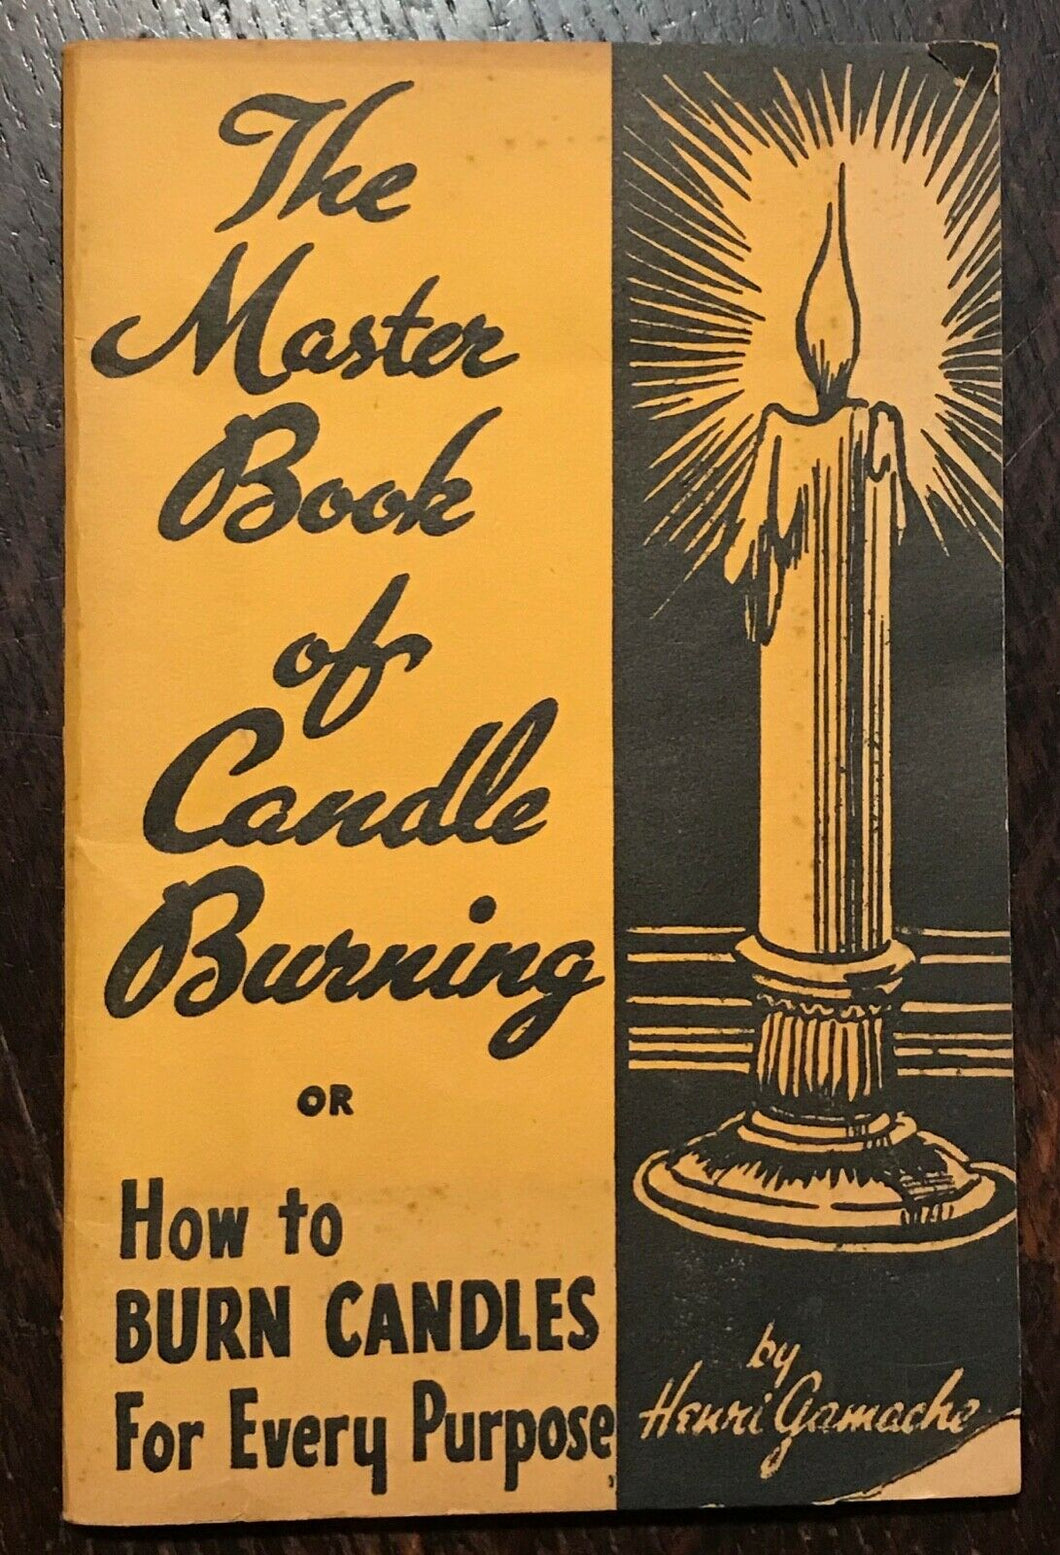 THE MASTER BOOK OF CANDLE BURNING - Gamache, 1st Ed 1942 - MAGICK WICCA SPELLS